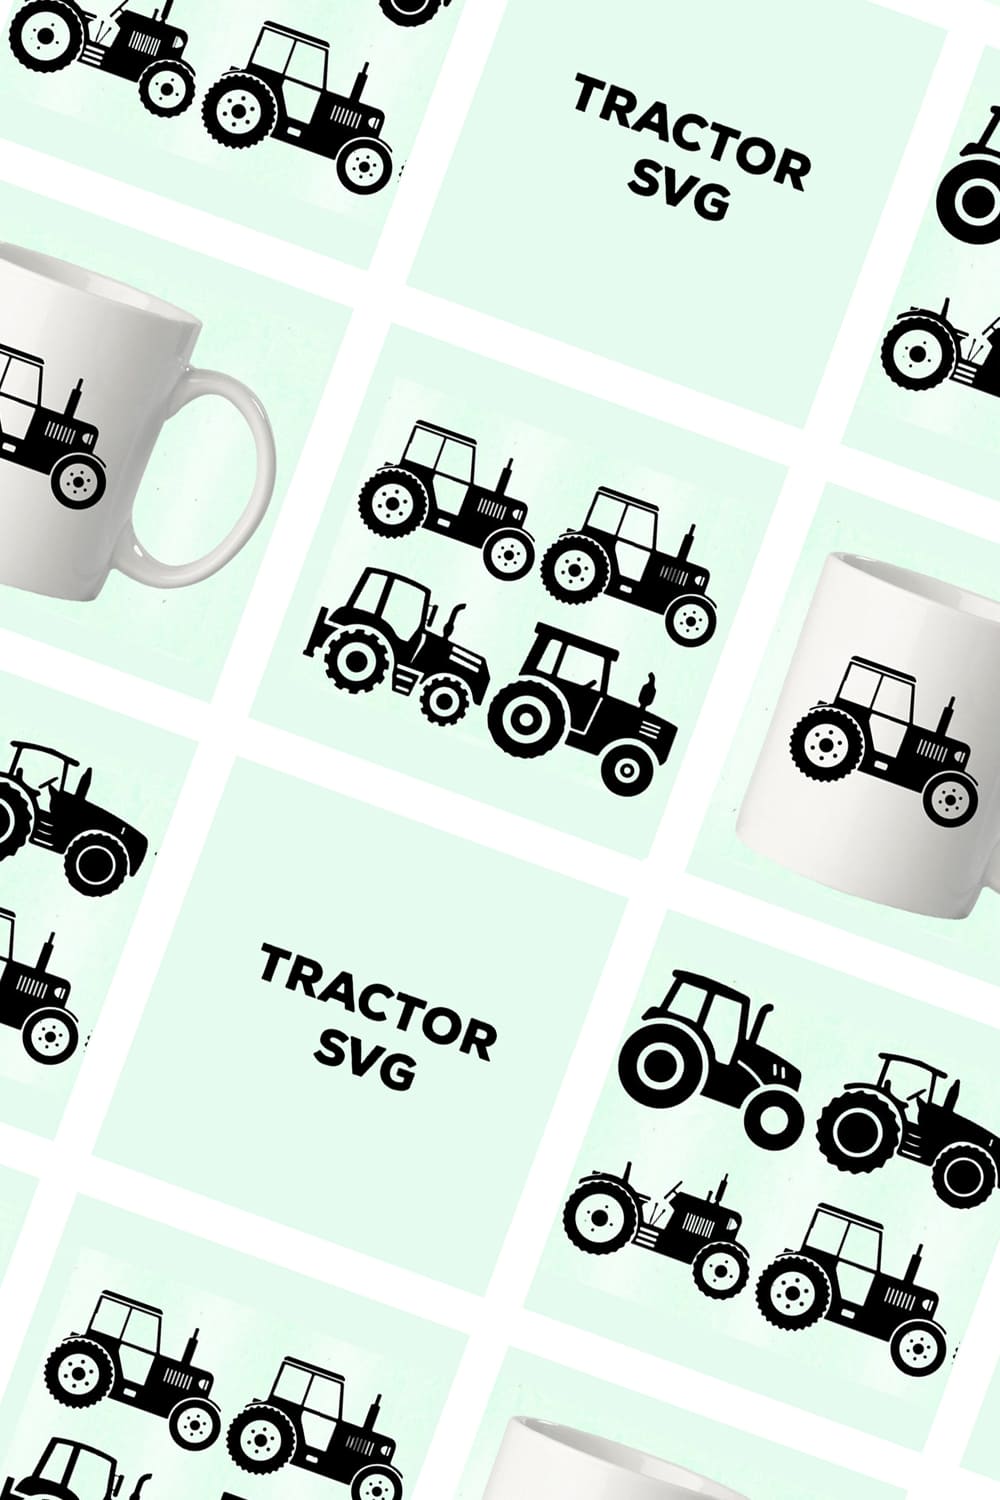 tractor svg clipart.